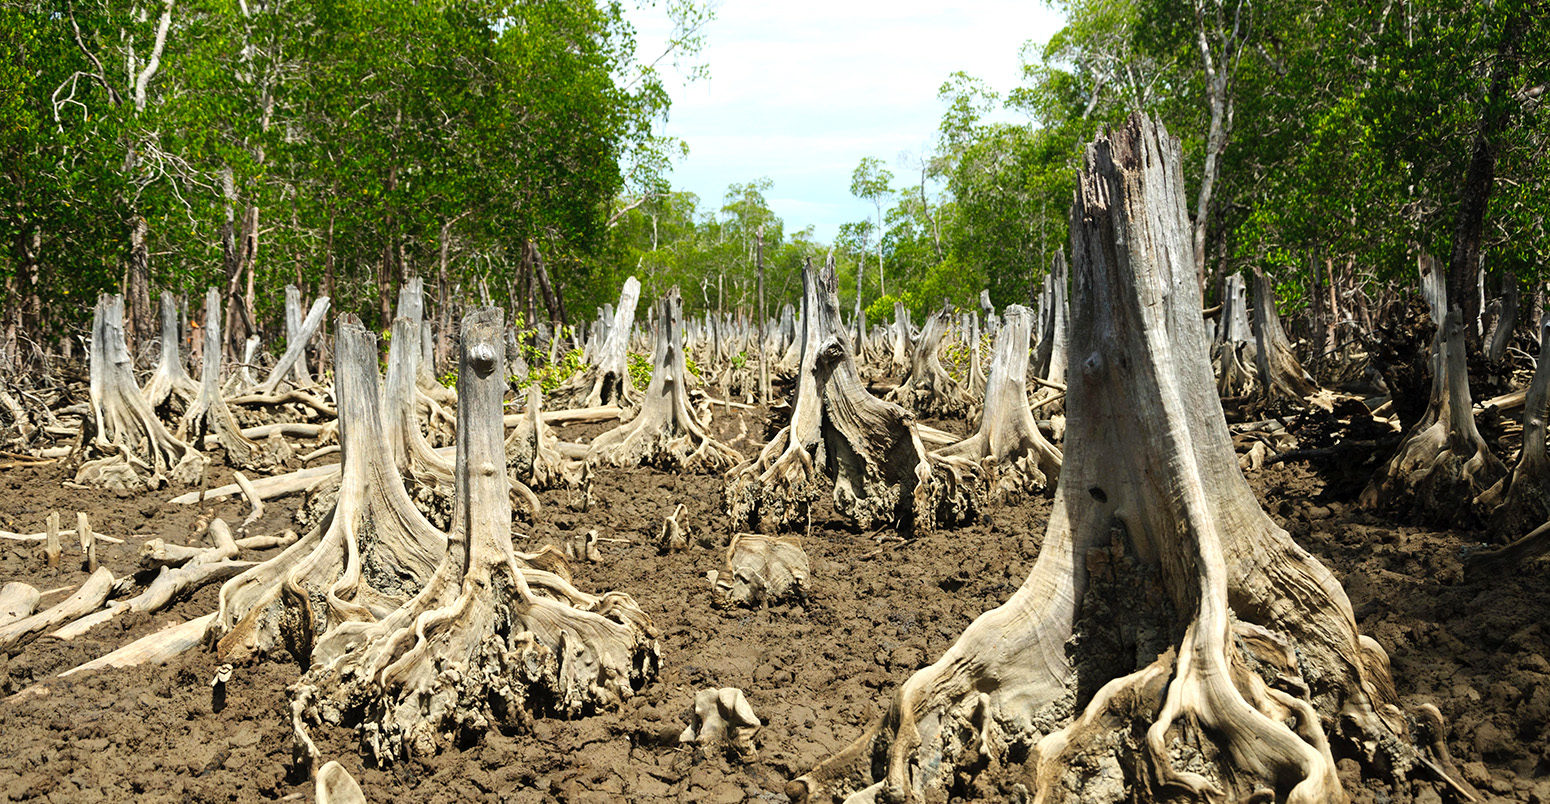 A deforested spot in a mangrove forest. Credit: Oliver S. - Madagascar General / Alamy Stock Photo. EDW769